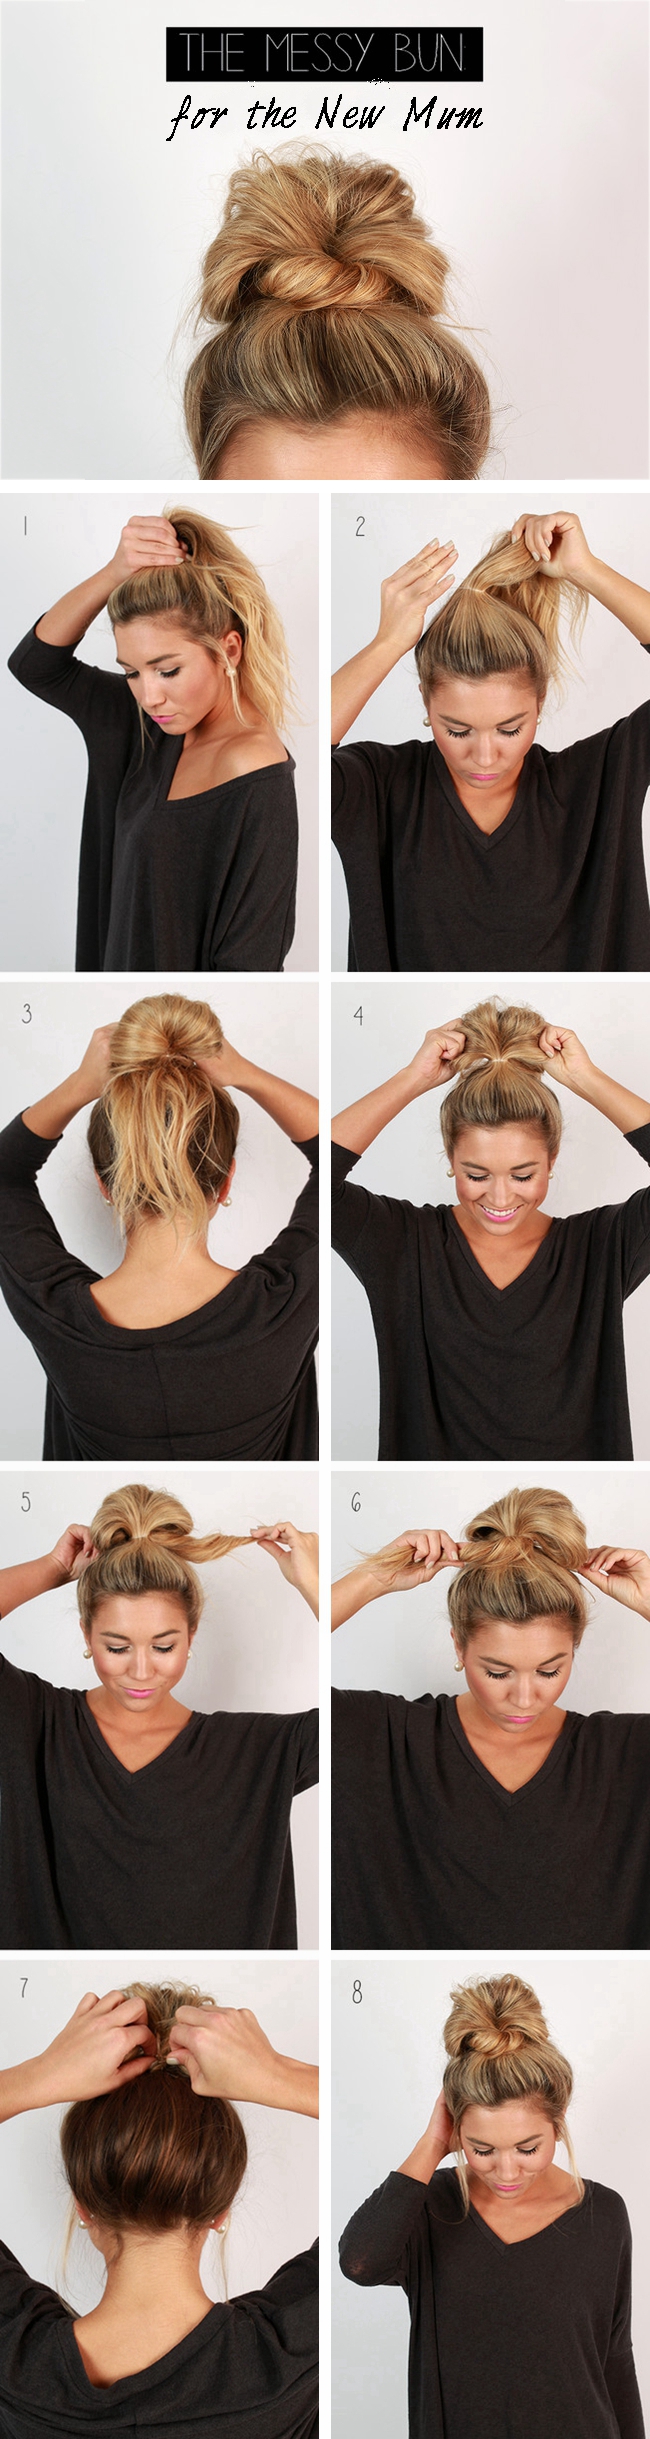 8 Quick Easy Hairstyles That Make Dirty Hair Look Fab Diy Thought